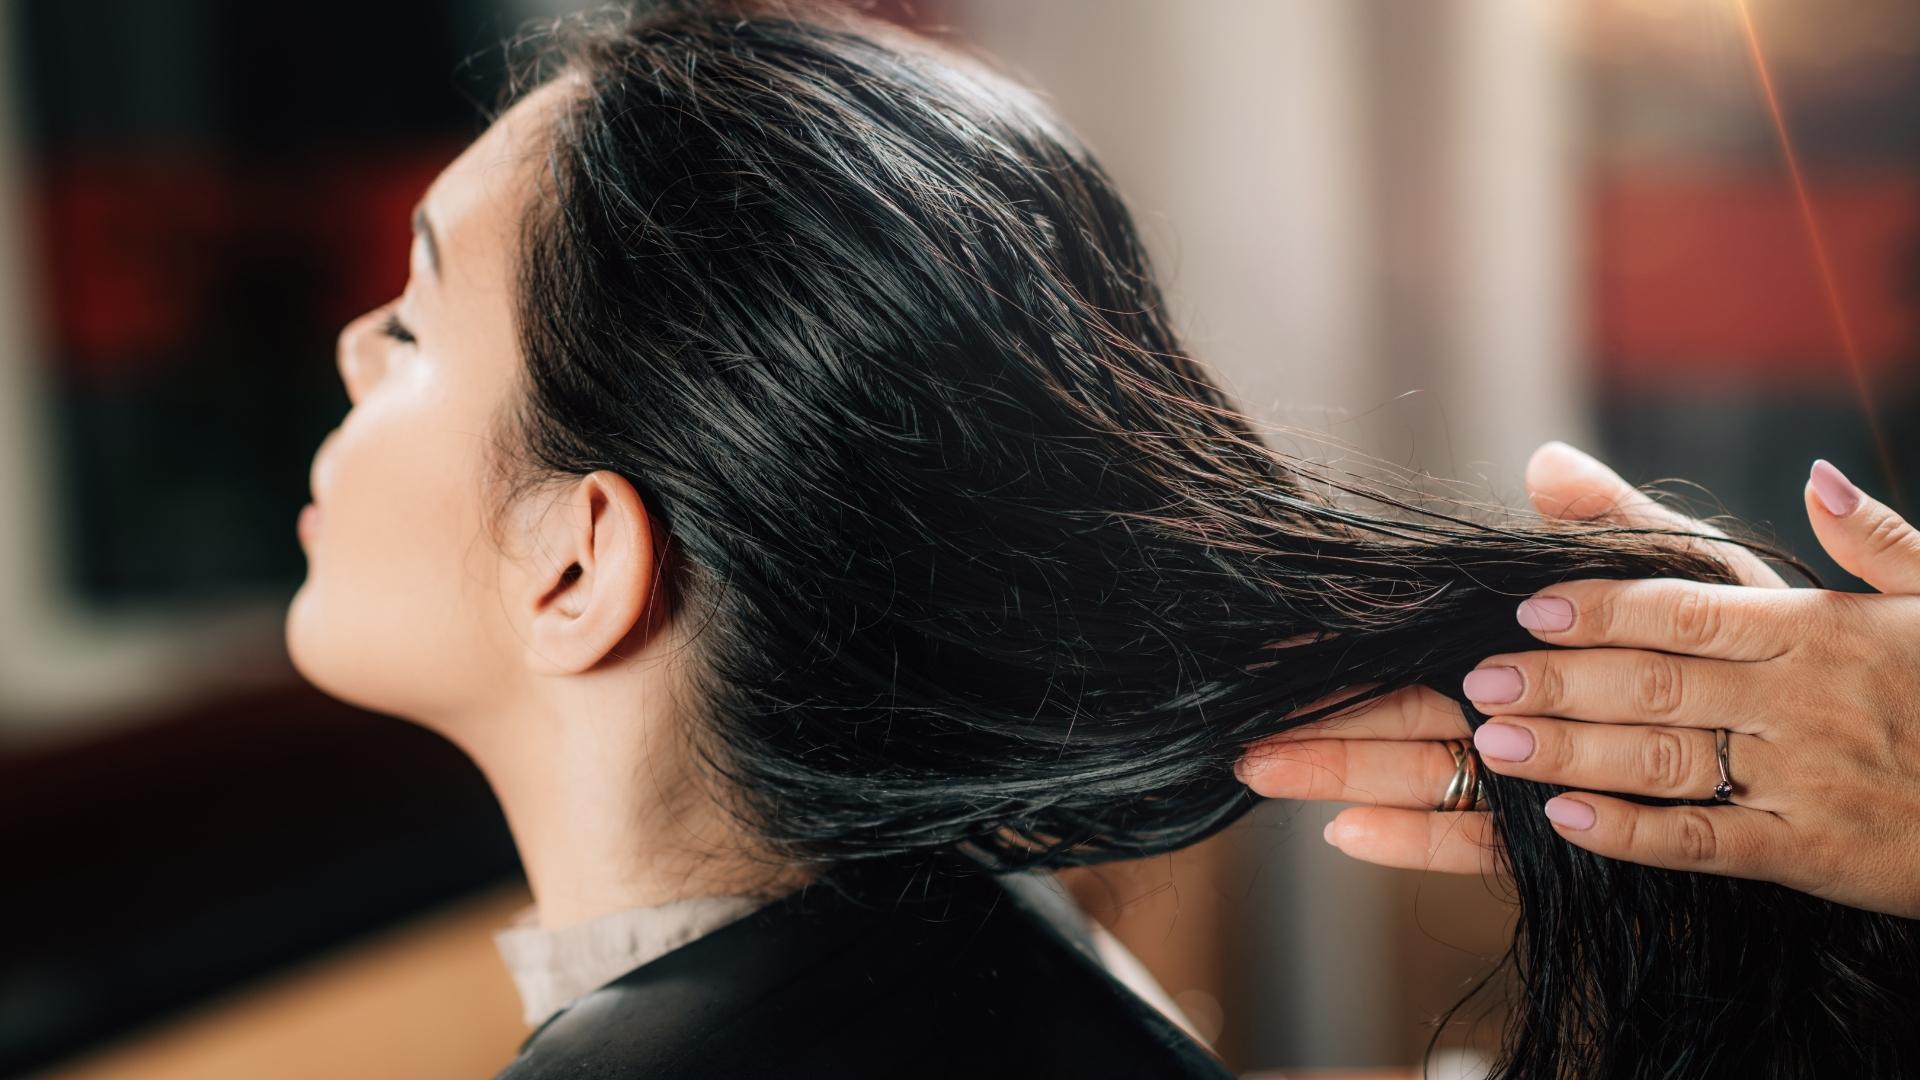 So what is Hair Slugging and does it help hair growth?